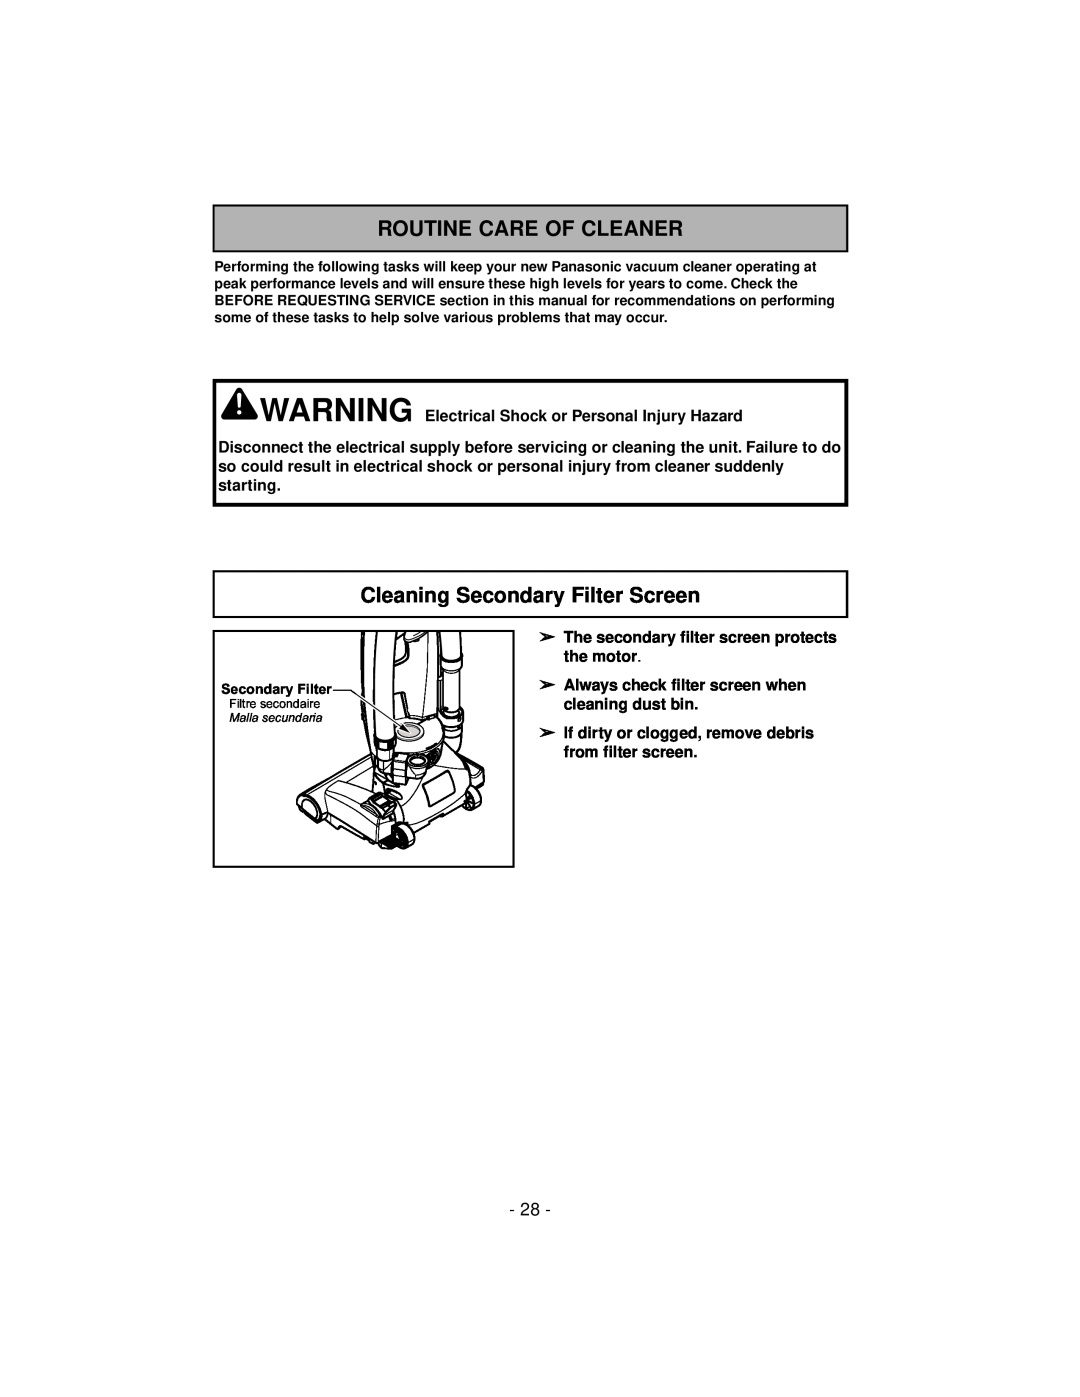 Panasonic MC-V7600 operating instructions Routine Care Of Cleaner, Cleaning Secondary Filter Screen 